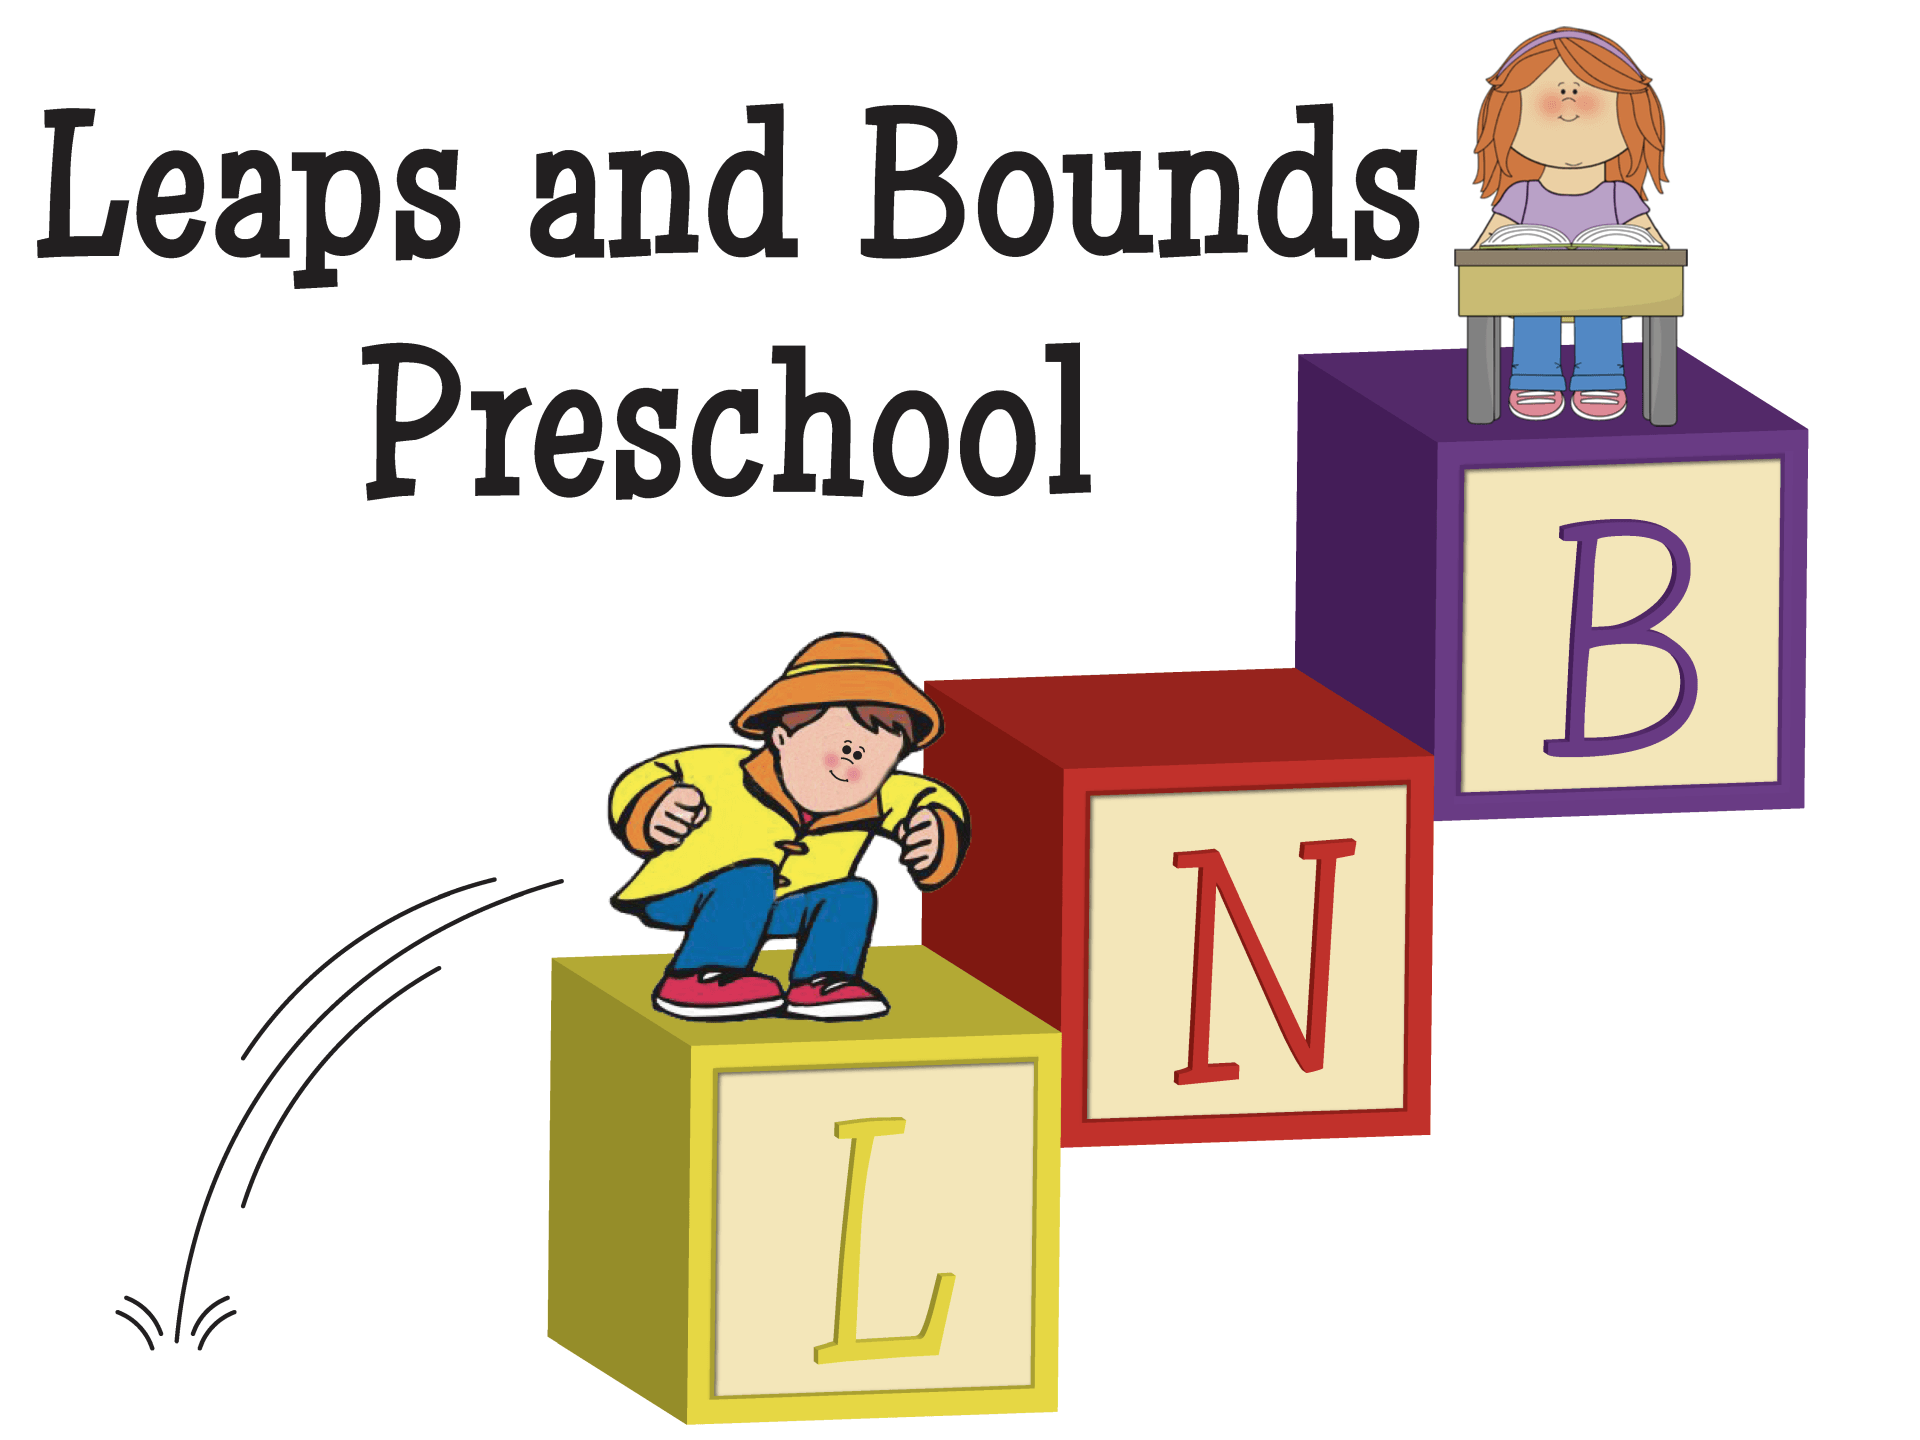 Leaps and Bounds Preschool Logo